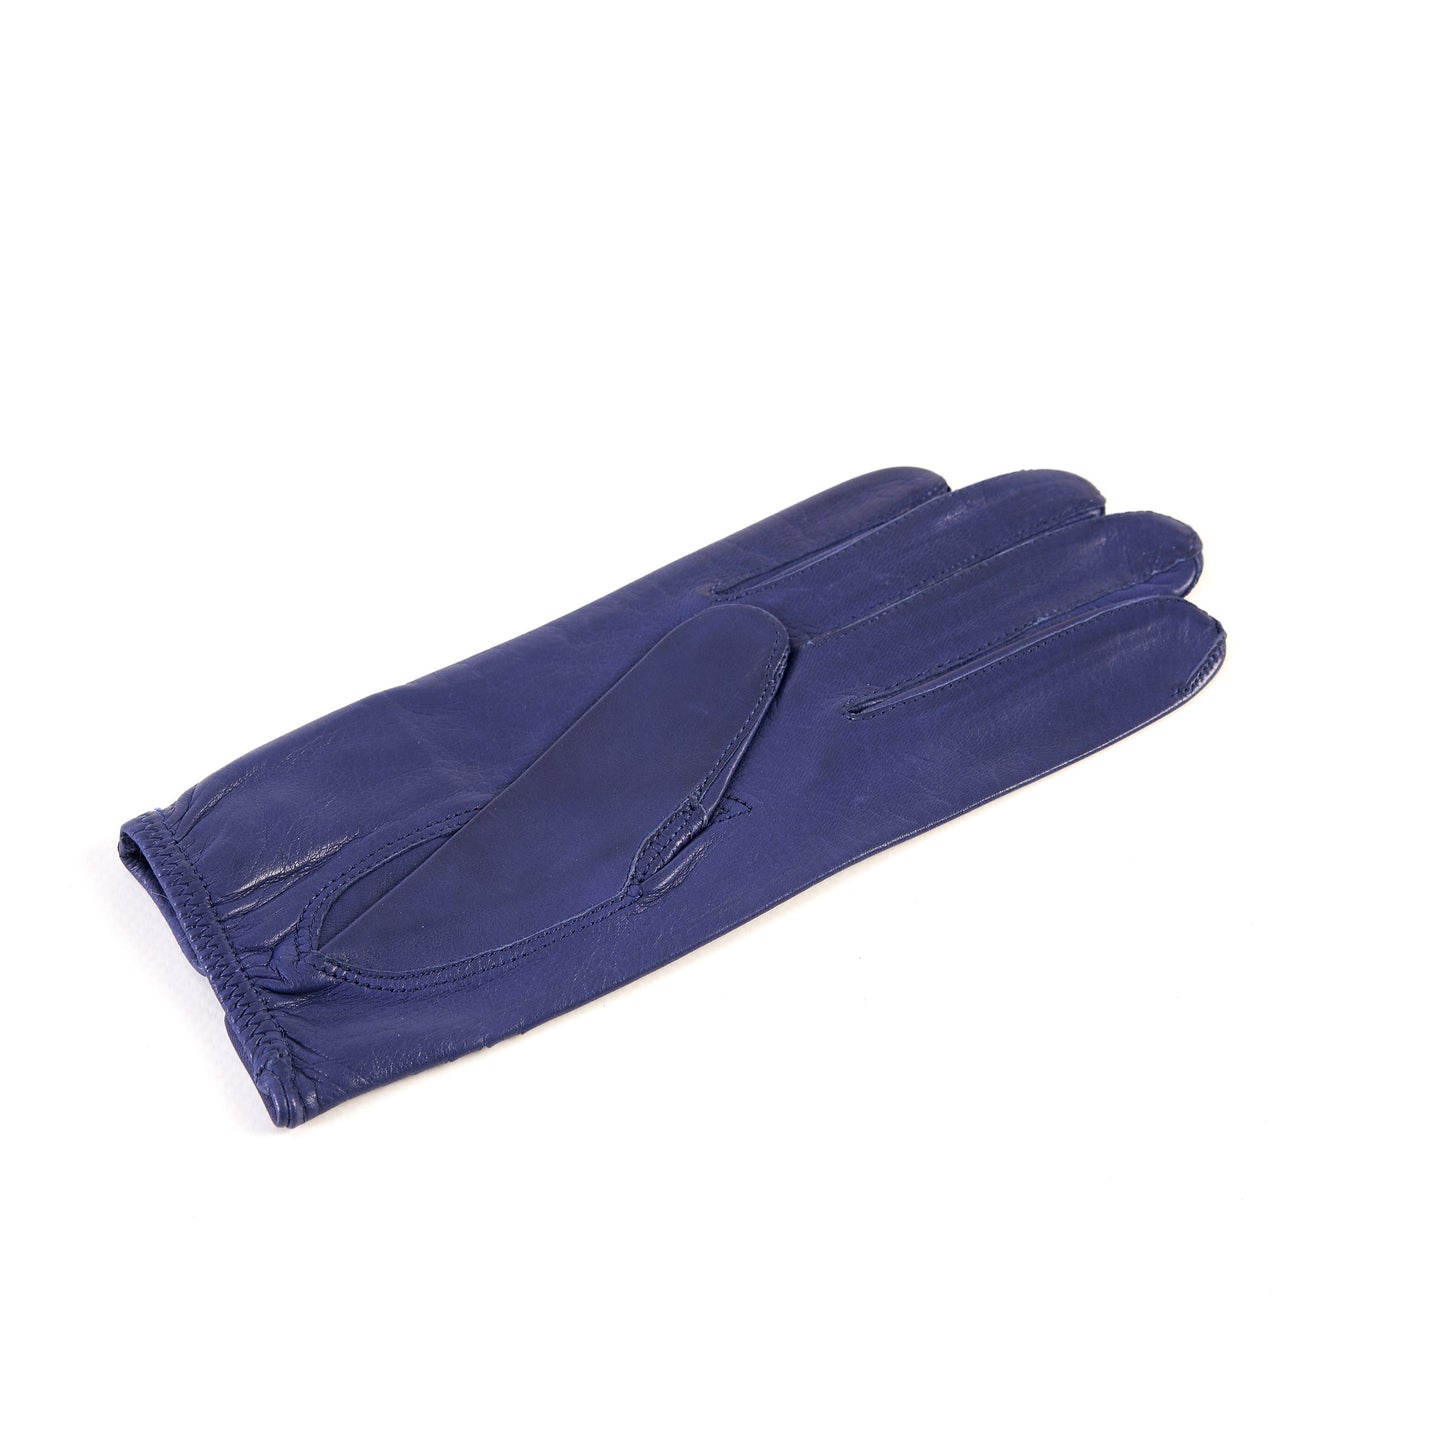 Women's unlined blue leather driving gloves with button closure